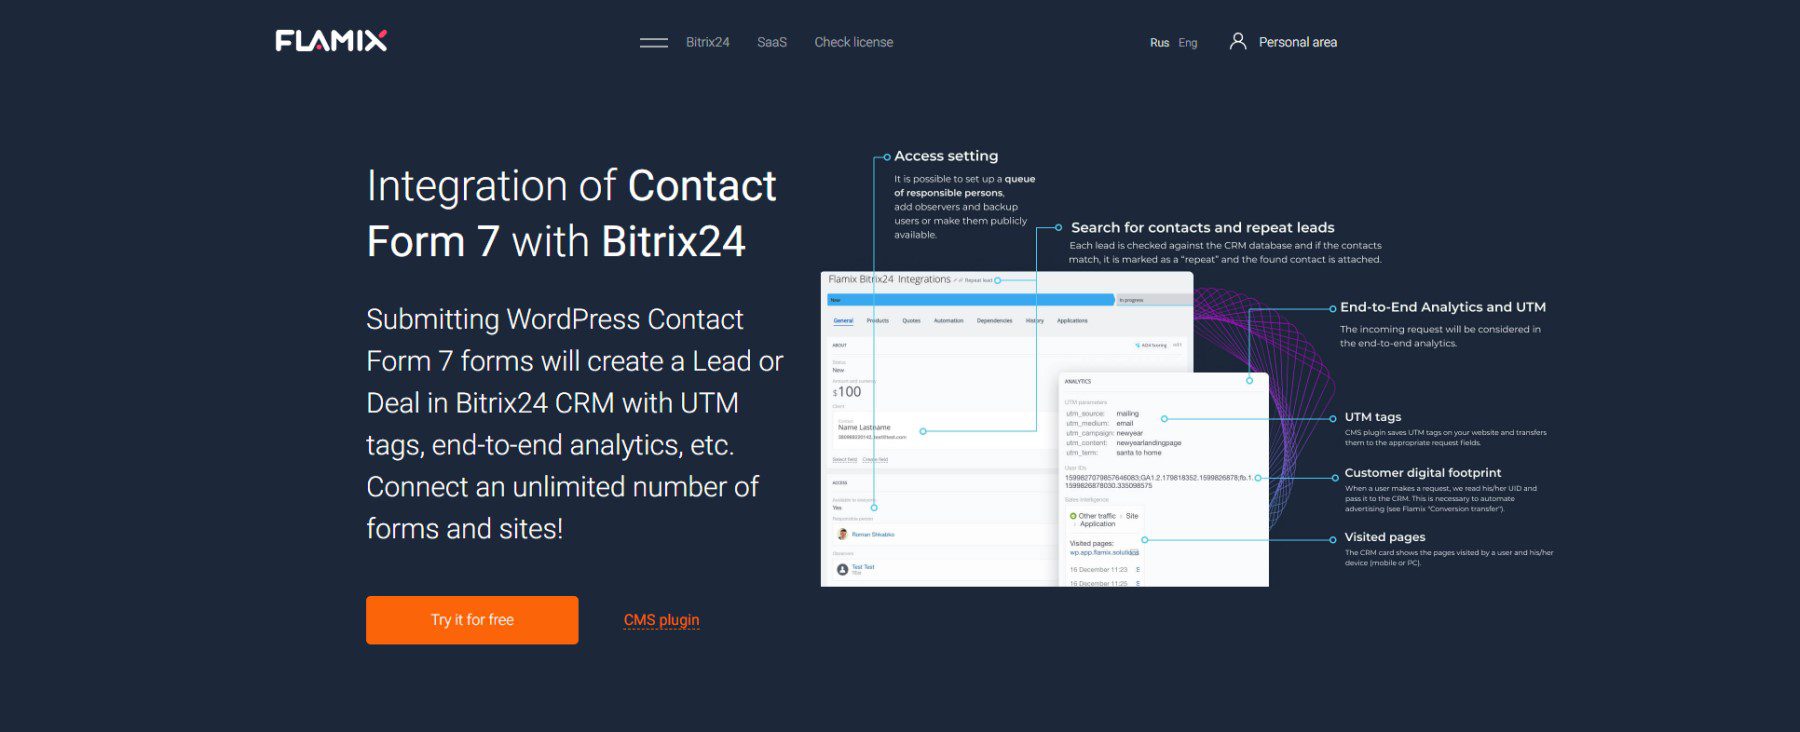 Connect Bitrix24 CRM to CF7 with Flamix